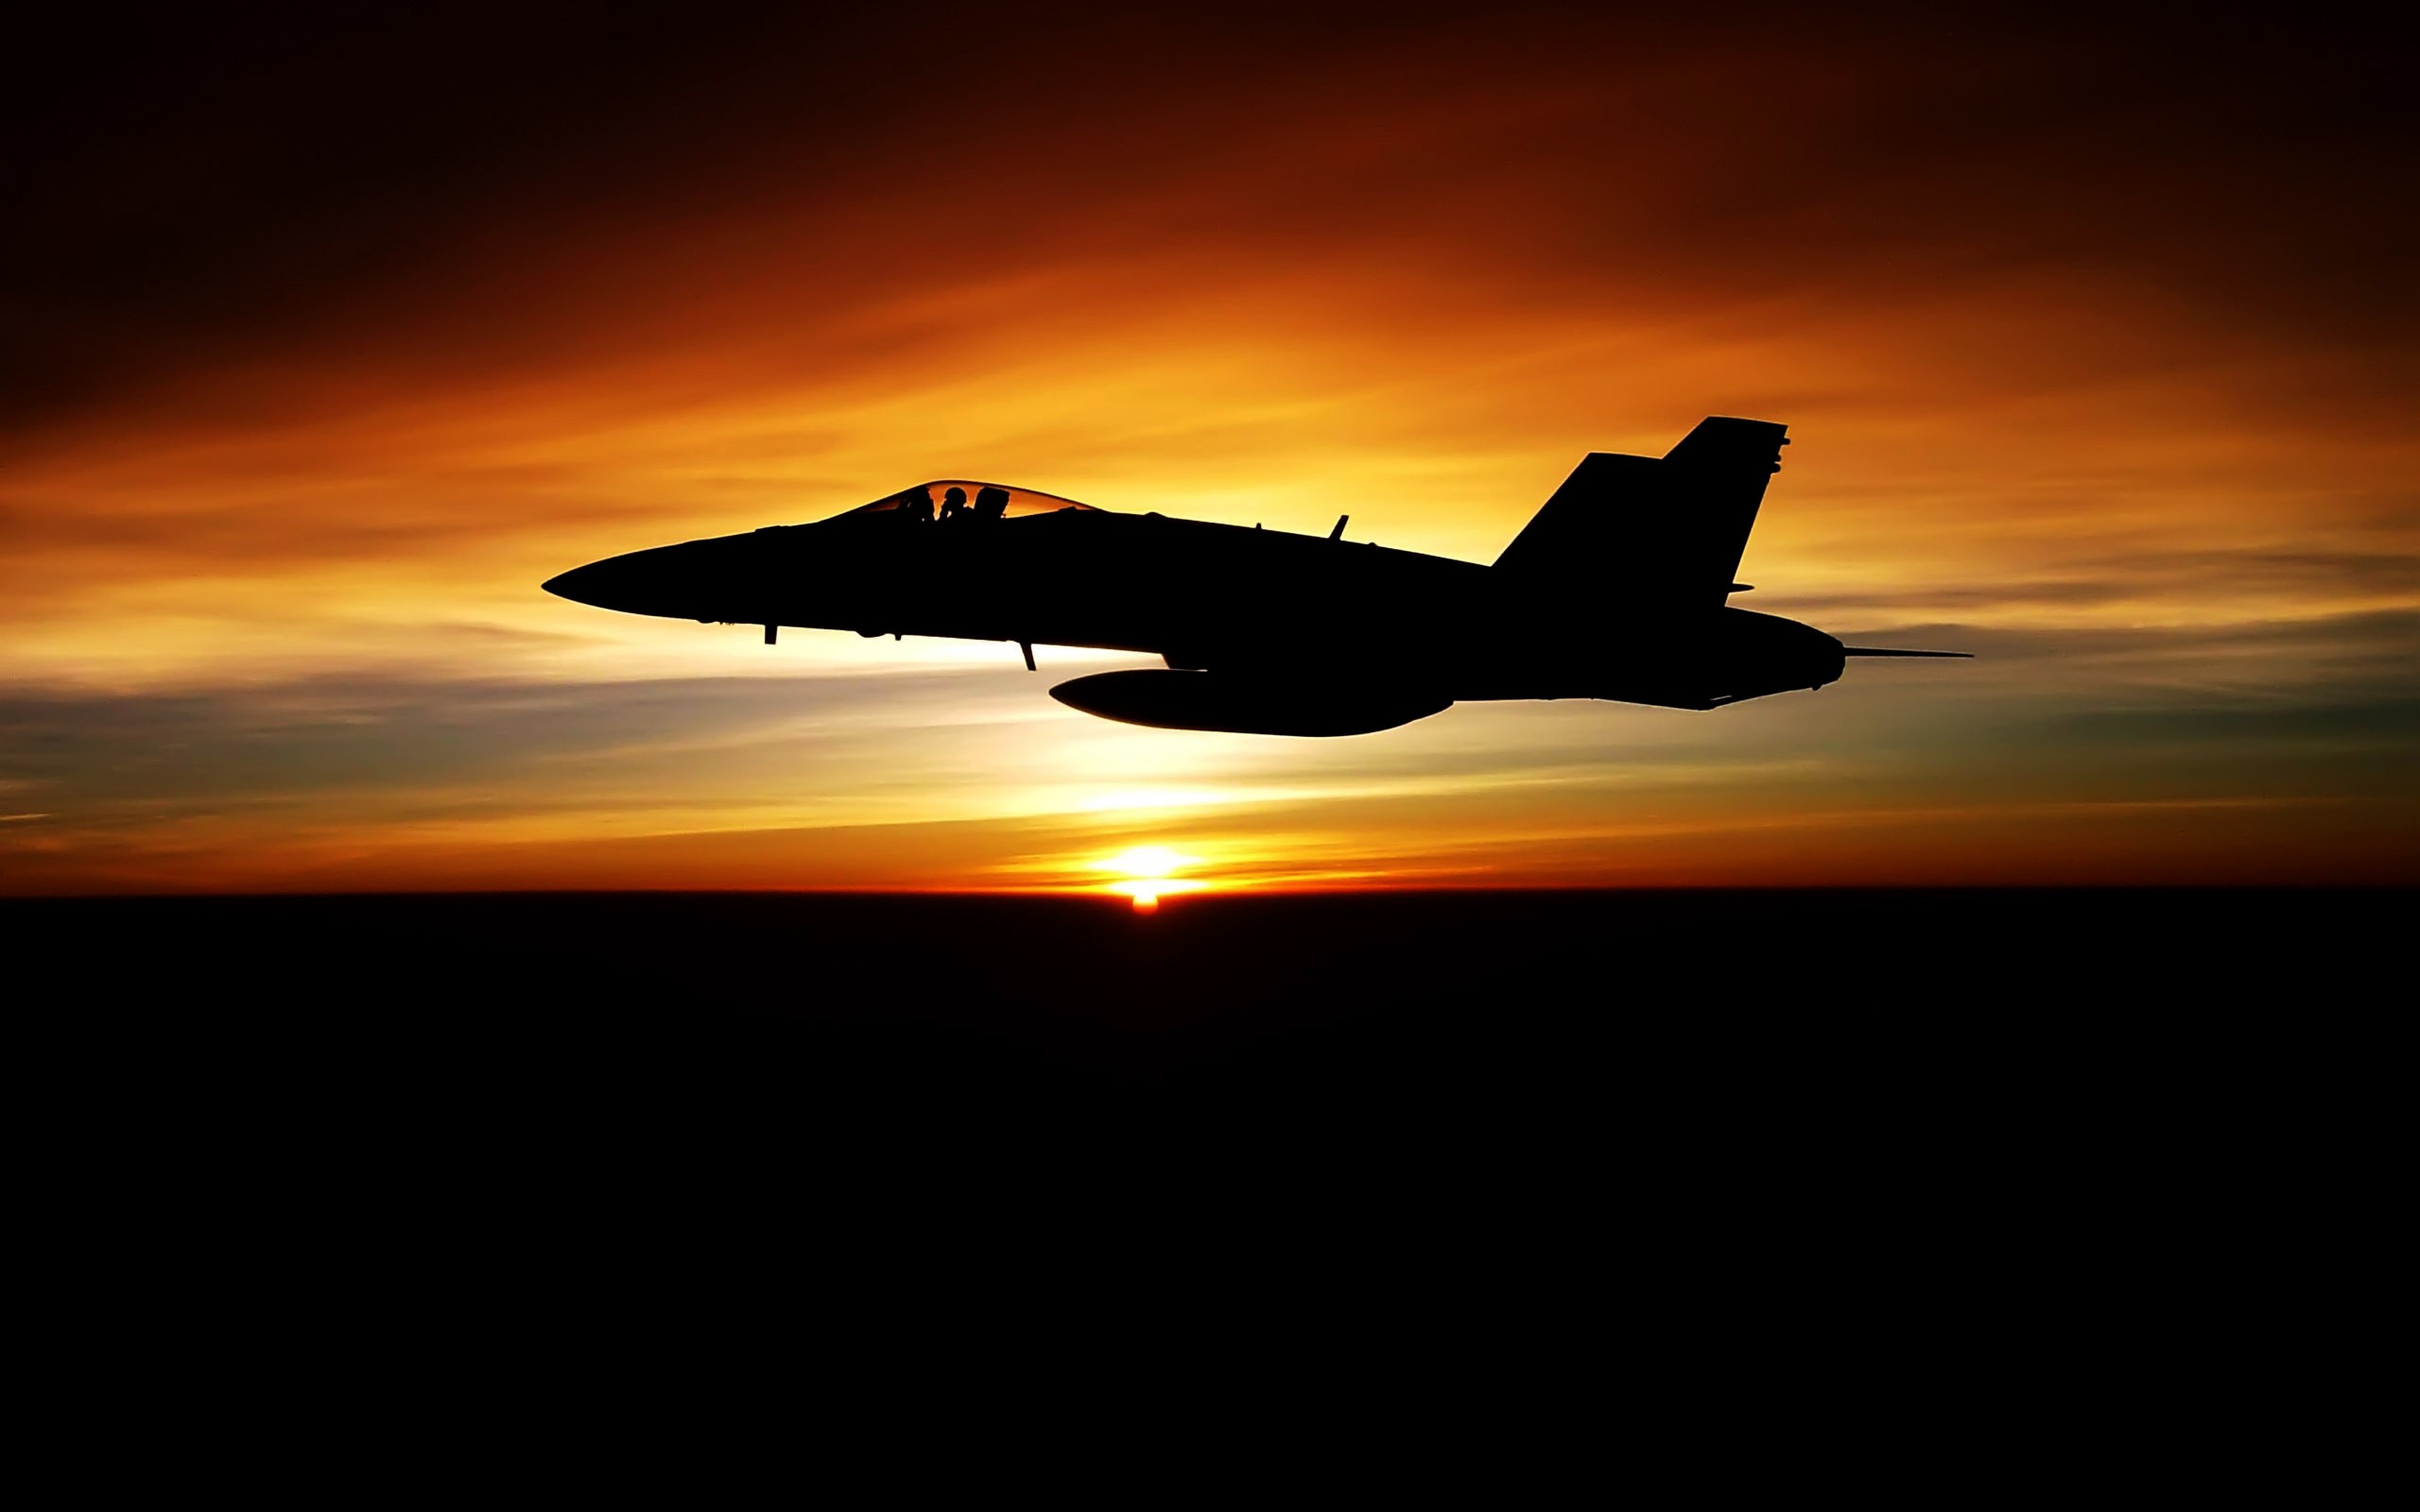 General 2560x1600 aircraft sunset military aircraft silhouette McDonnell Douglas F/A-18 Hornet vehicle military vehicle sky dark sunlight American aircraft military sunset glow photography McDonnell Douglas clouds airplane dusk pilot